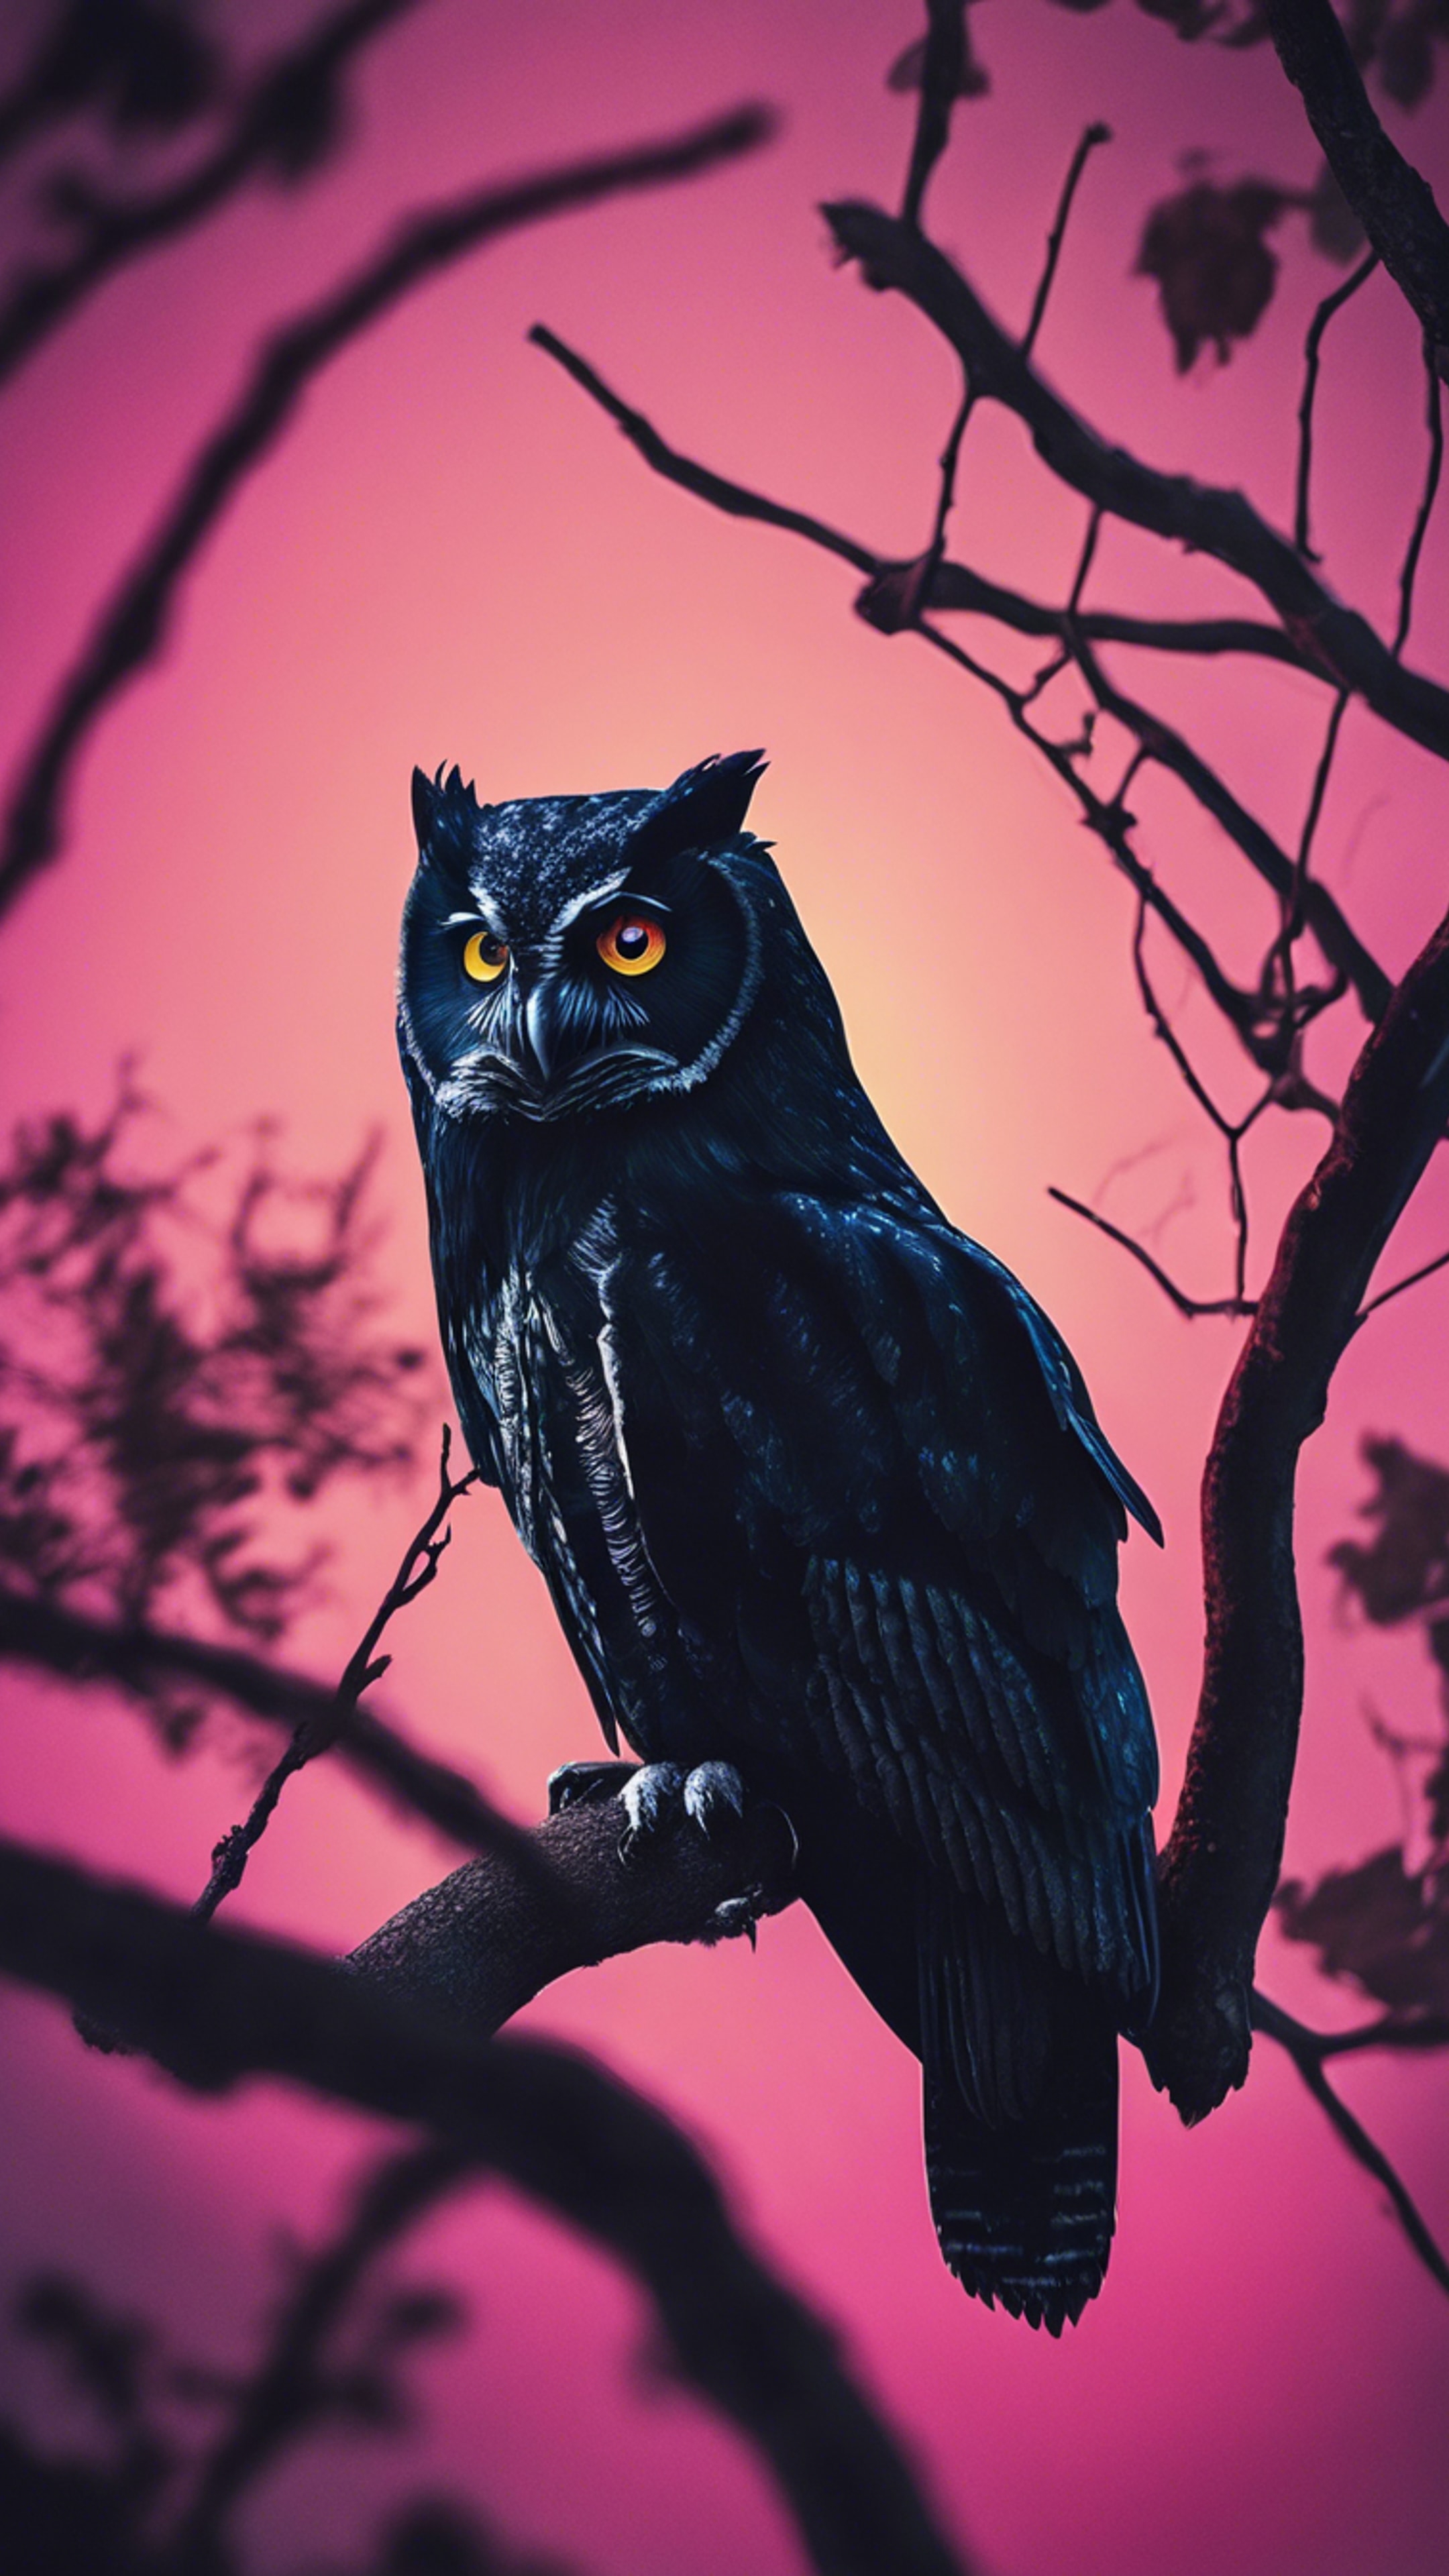 A pitch black owl, its eyes glowing in cool neon colors, perched on a tree branch on a moonless night. Fondo de pantalla[de9c9fccdafb4c81814c]